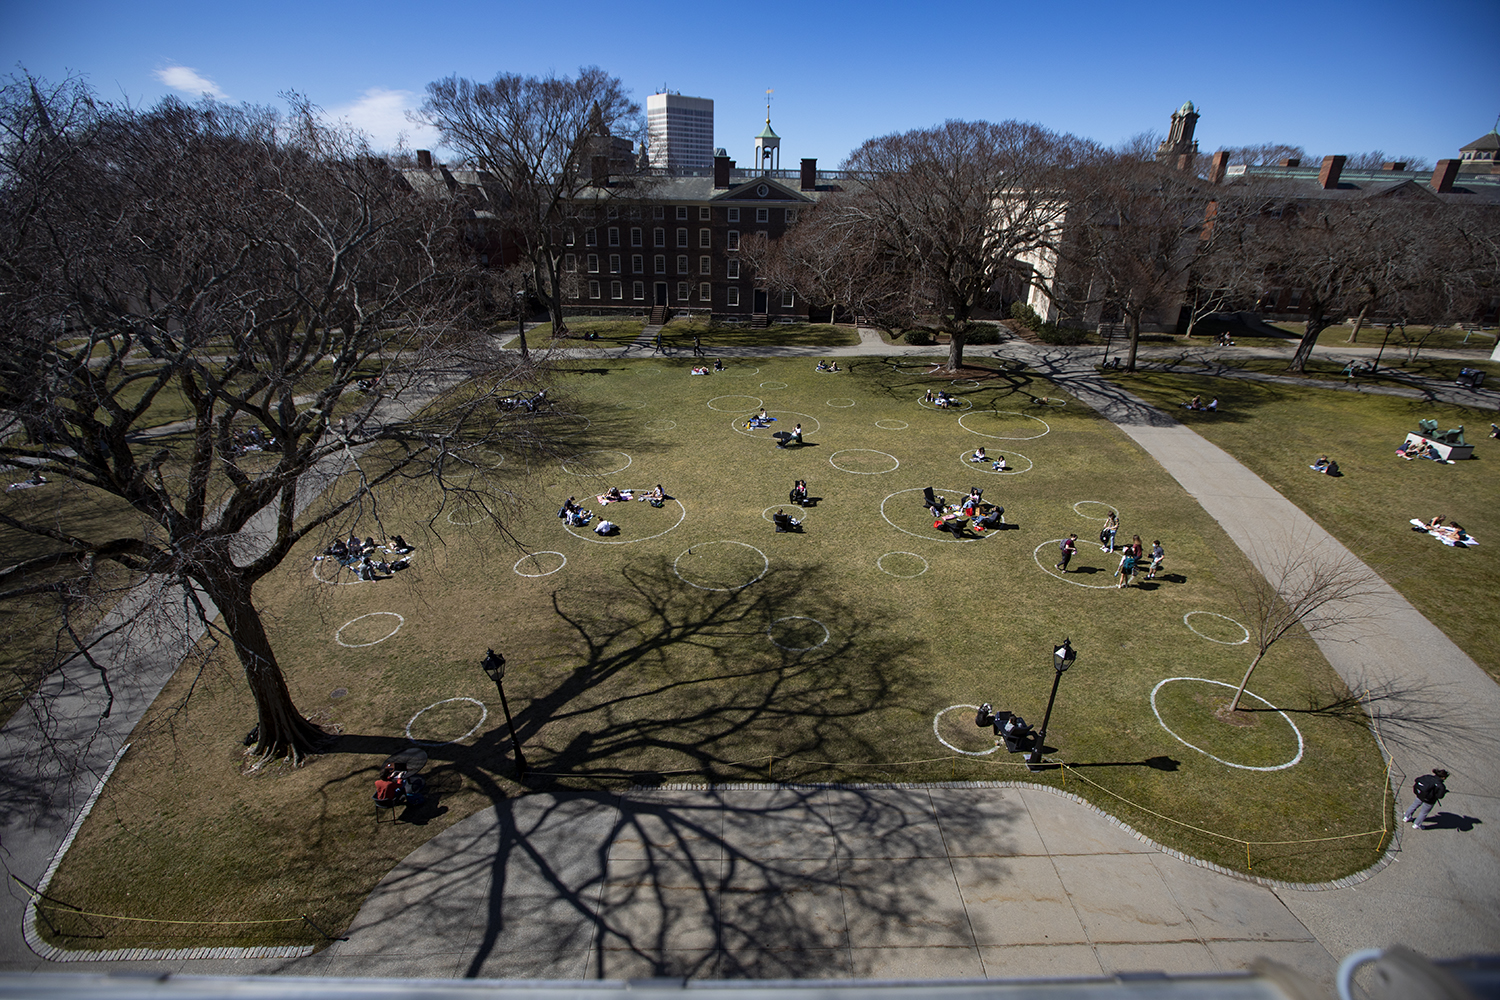 Students join podmates in socially distanced circles on the Campus Green